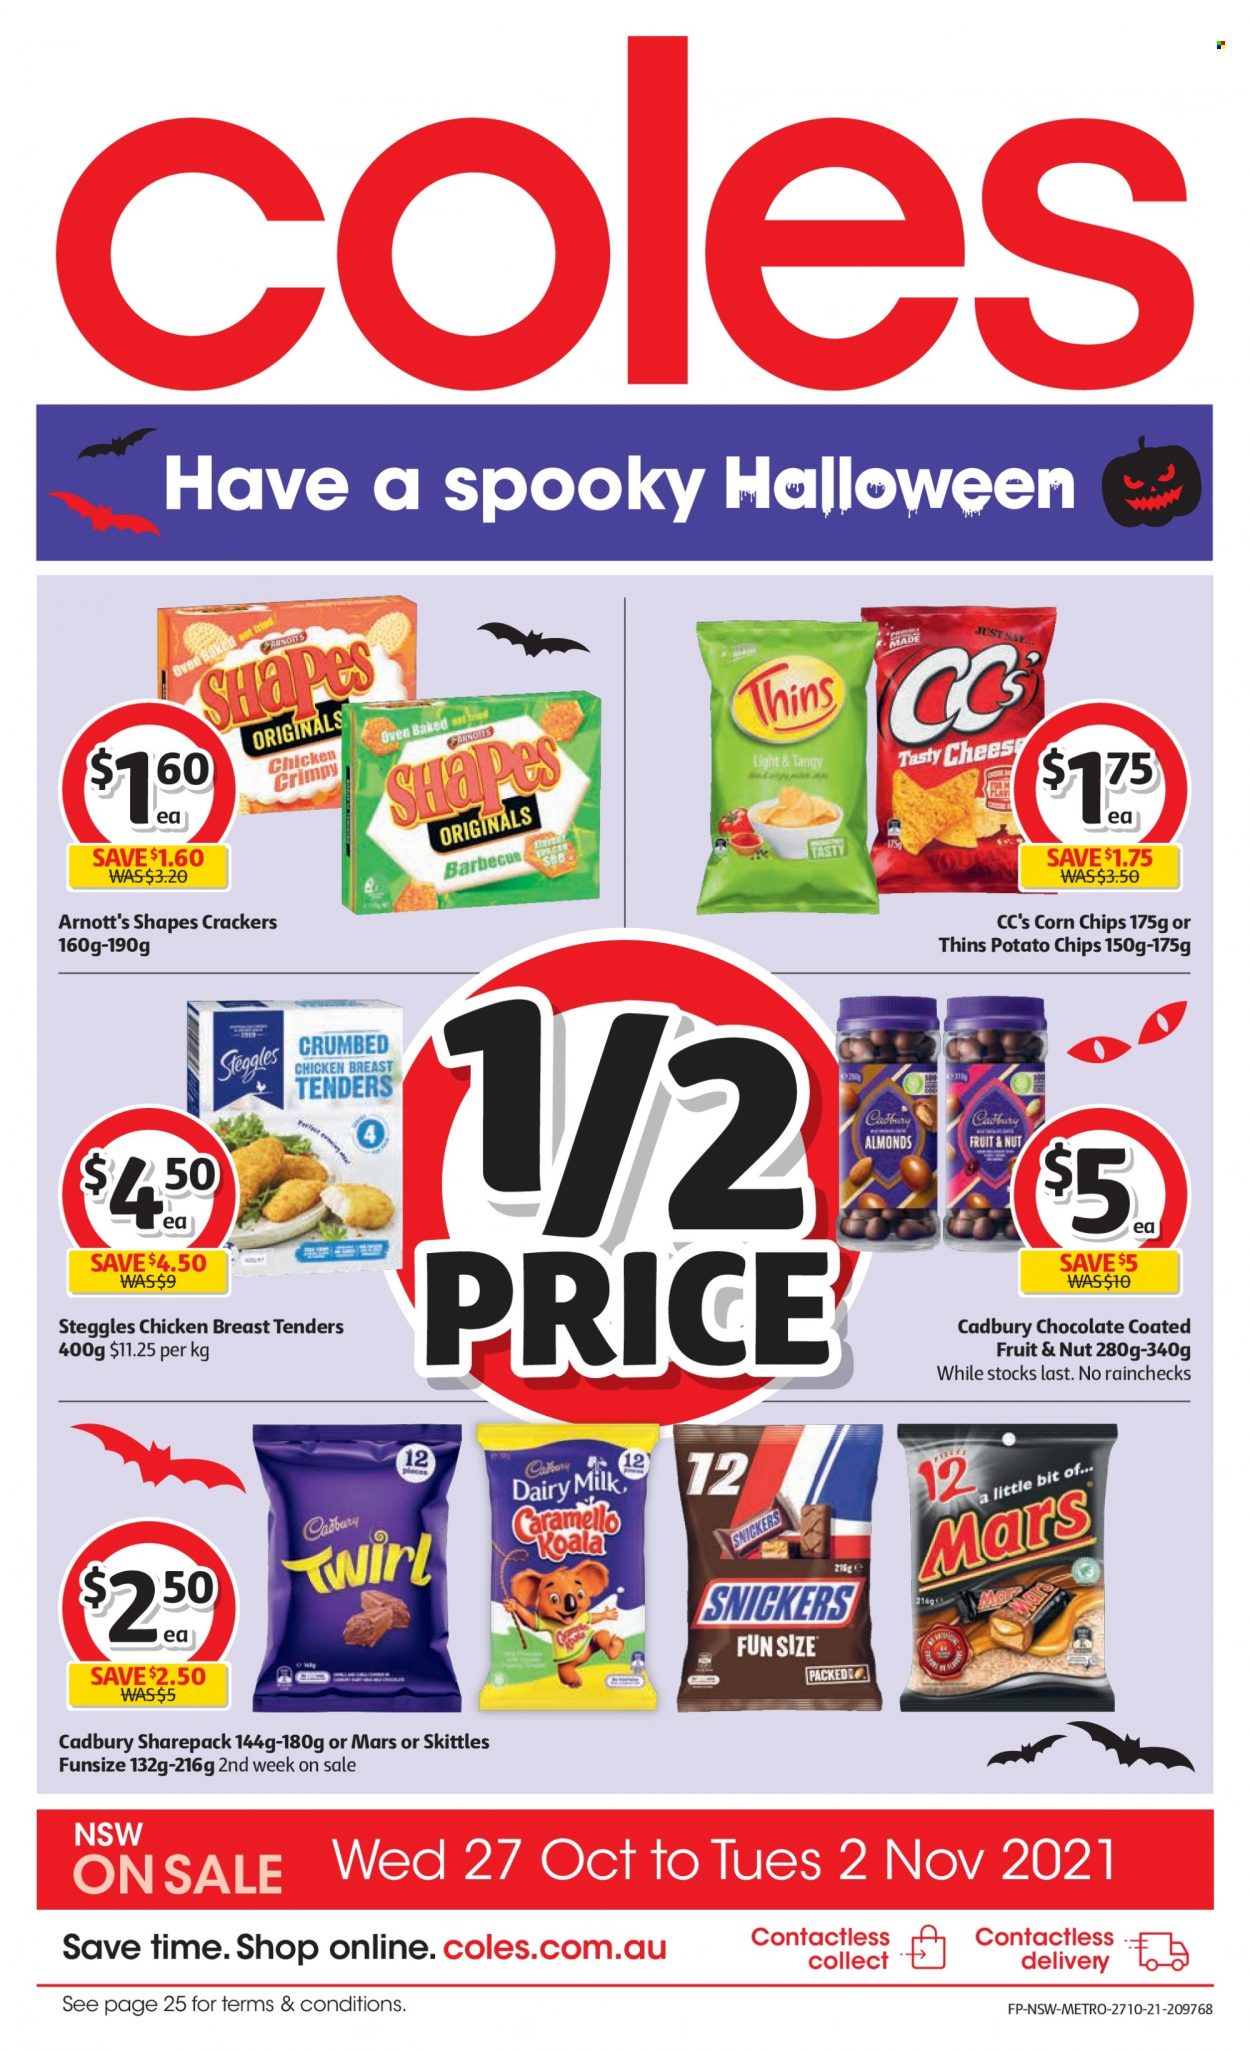 thumbnail - Coles Catalogue - 27 Oct 2021 - 2 Nov 2021 - Sales products - chicken tenders, chocolate, Snickers, Mars, crackers, Cadbury, Dairy Milk, Skittles, potato chips, chips, Thins, corn chips, almonds. Page 1.